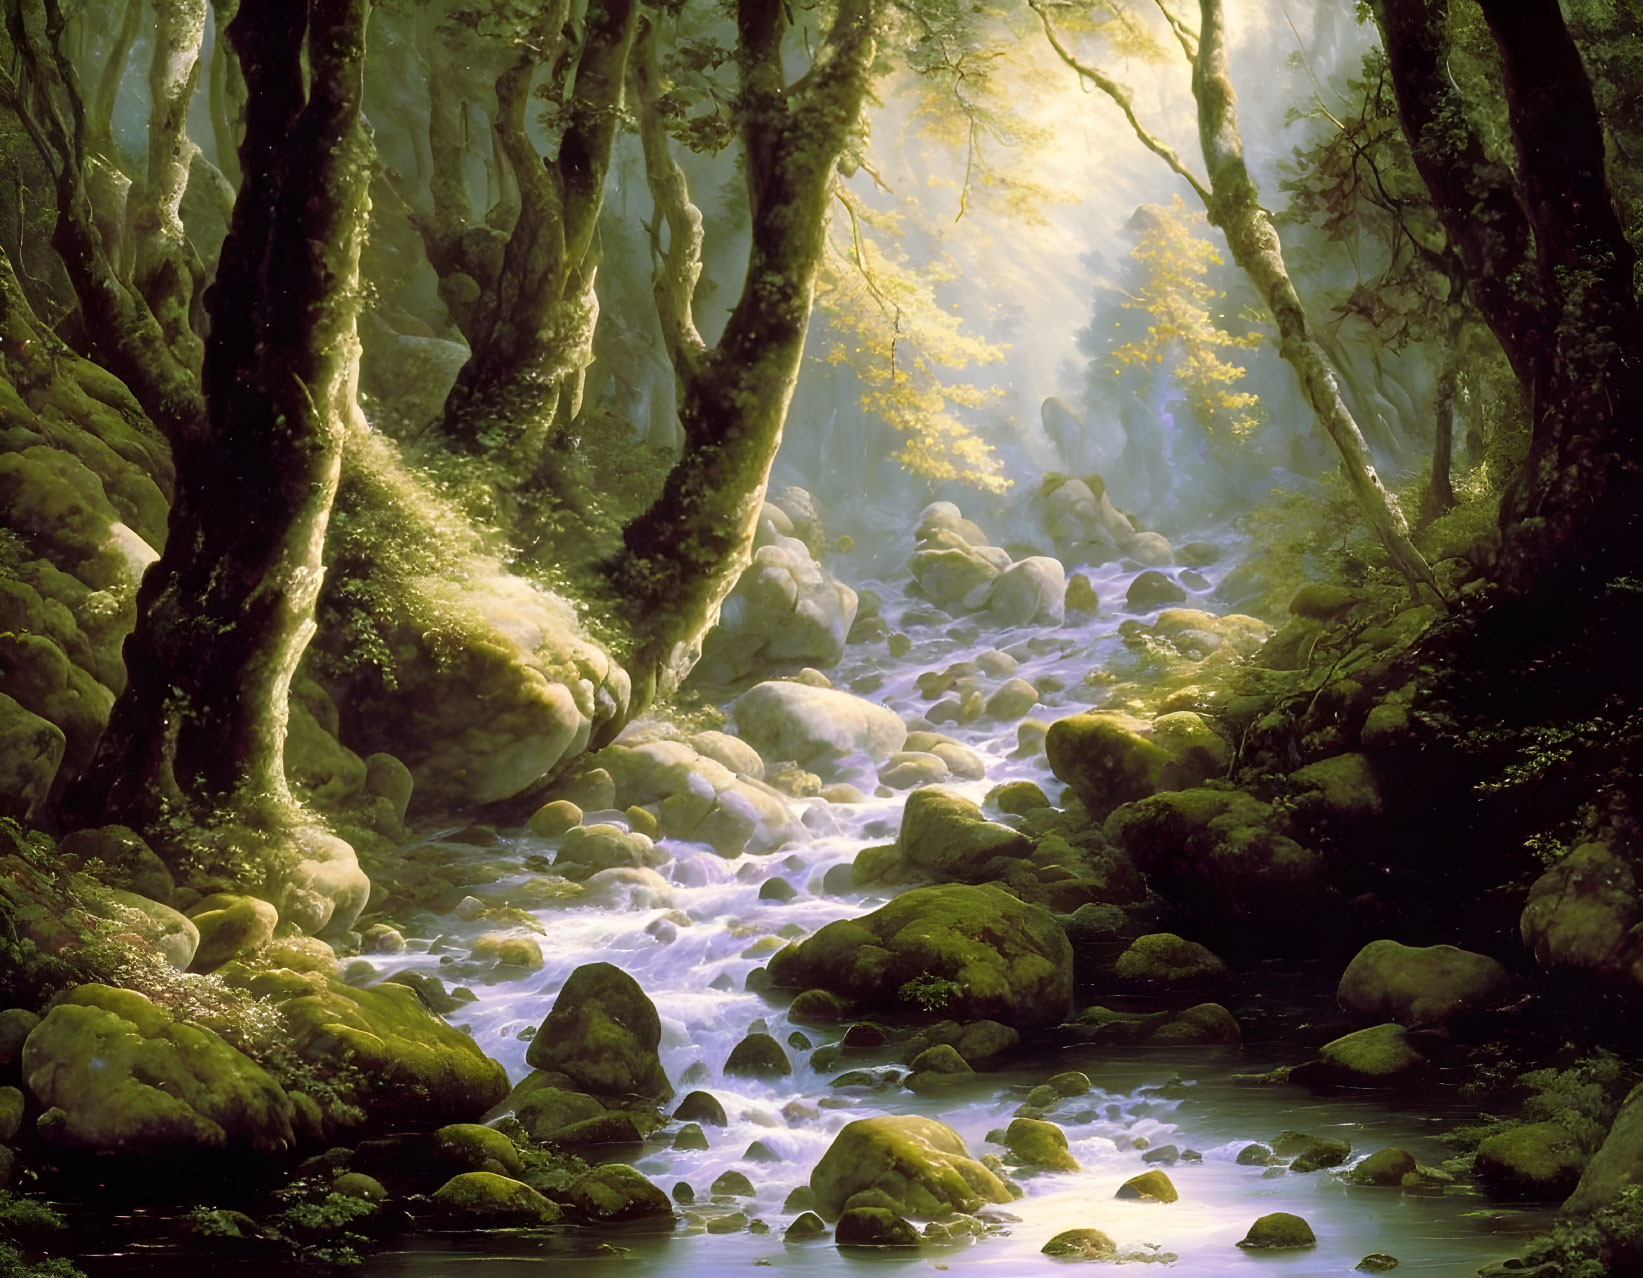 Misty forest with moss-covered rocks and stream under sunlight